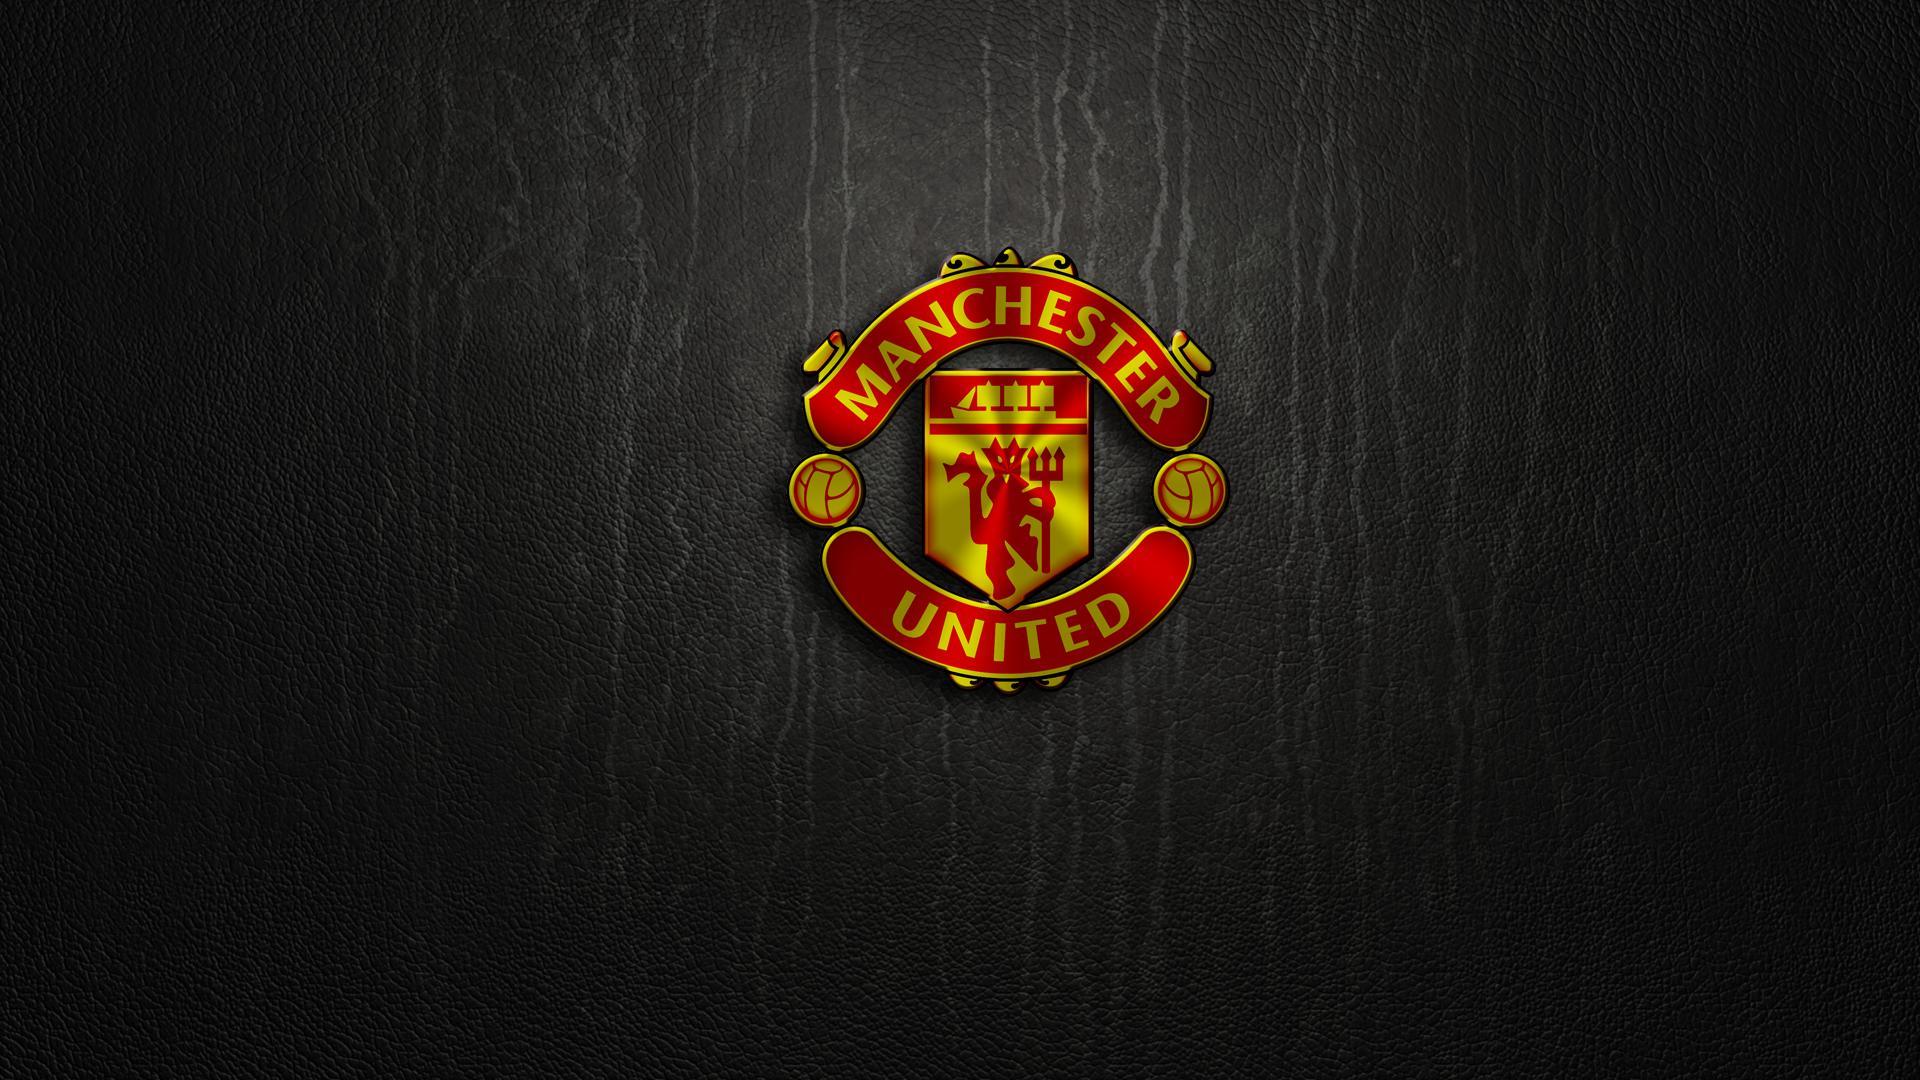 HQ RES Wallpaper of Manchester United HD for PC & Mac, Laptop